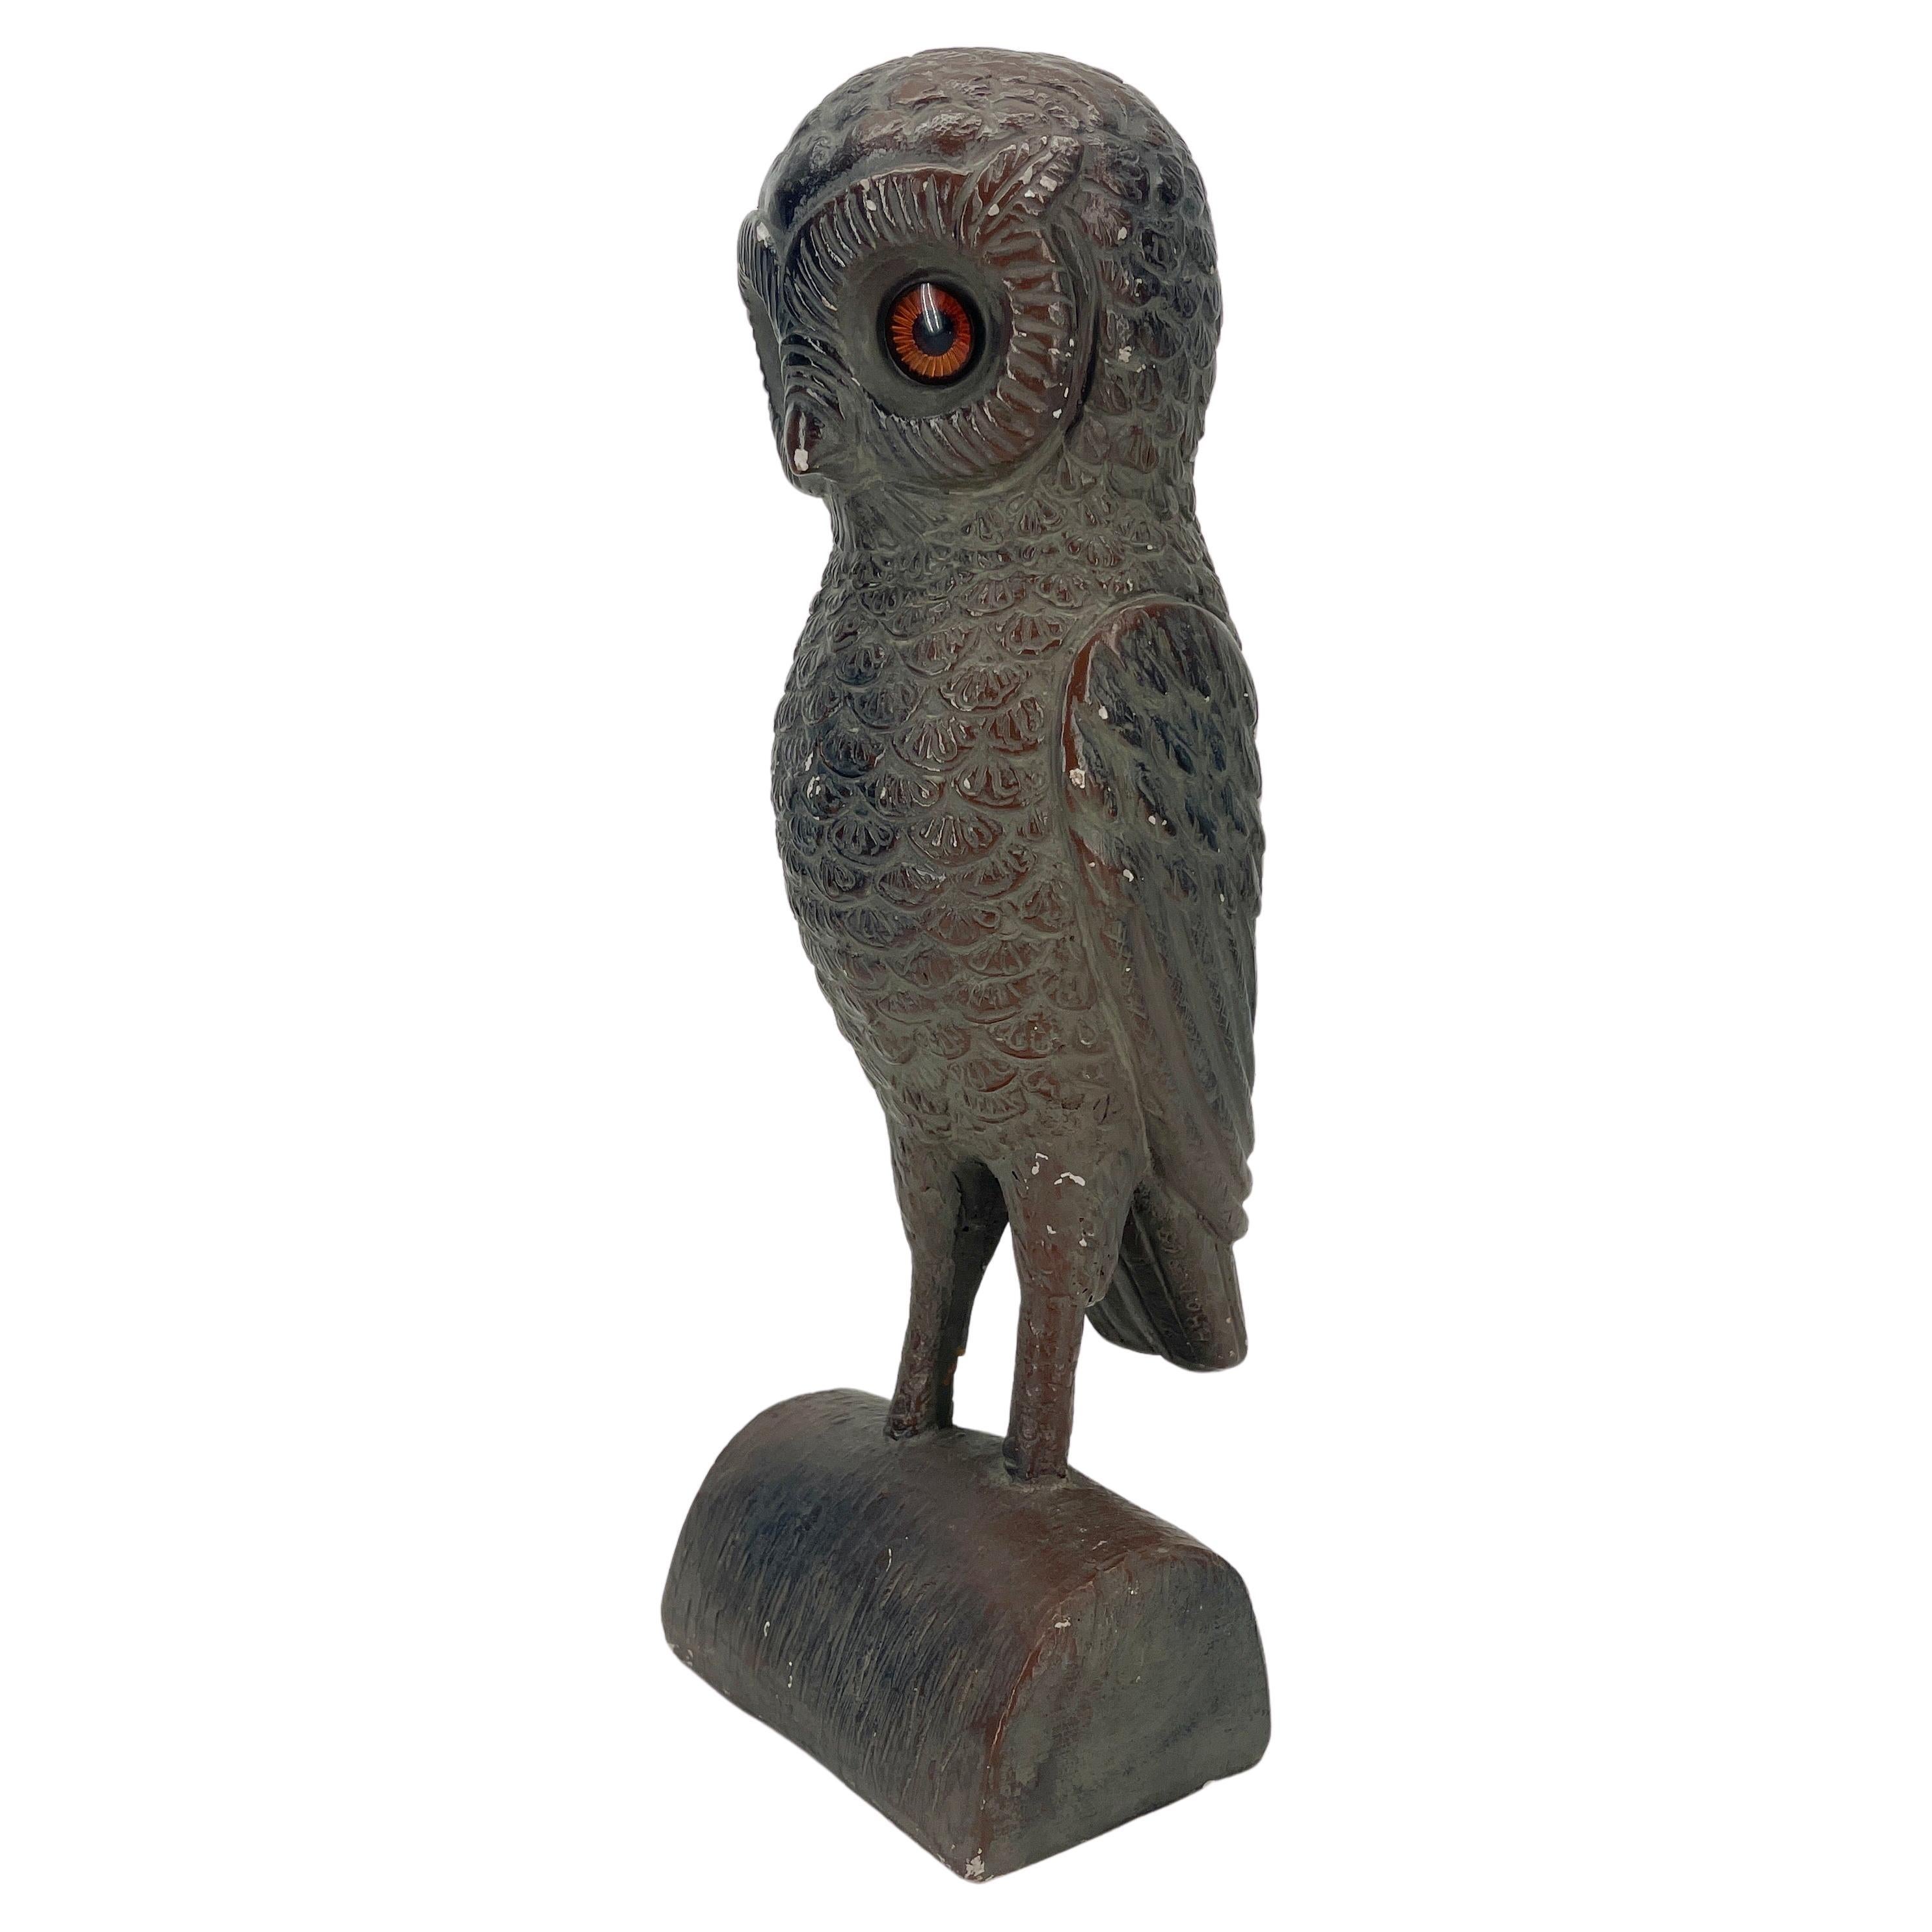 Vintage ceramic owl sculpture on stand with glass eyes.